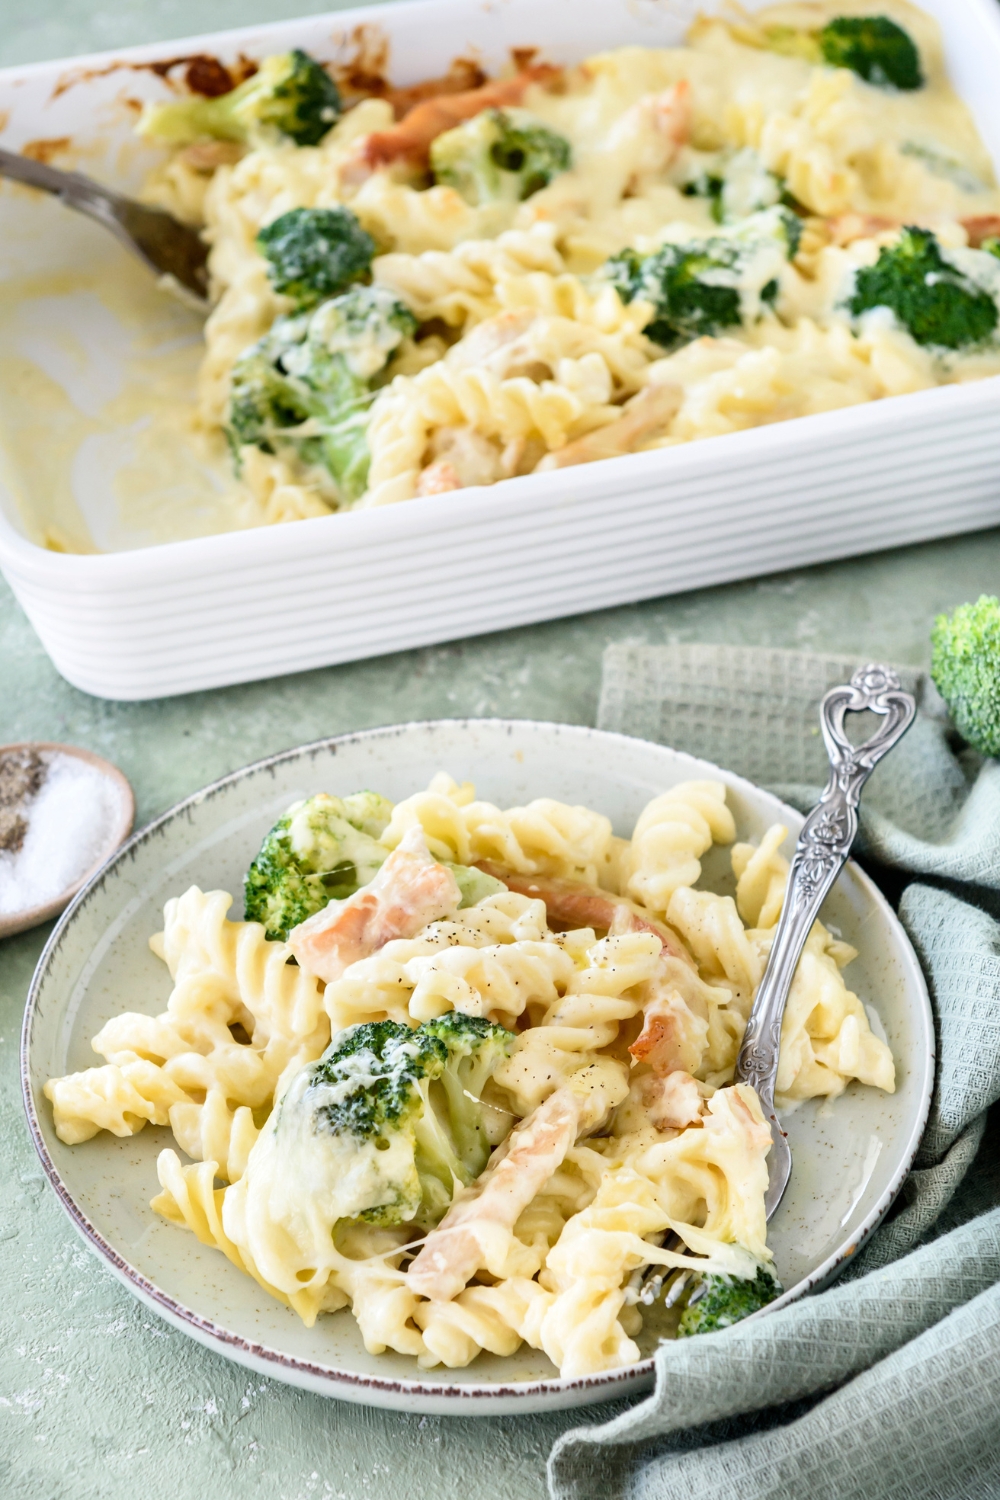 A bowl of pasta in cream sauce with chicken strips and cooked broccoli mixed in the pasta. The rest of the pasta is in a casserole dish in the background.